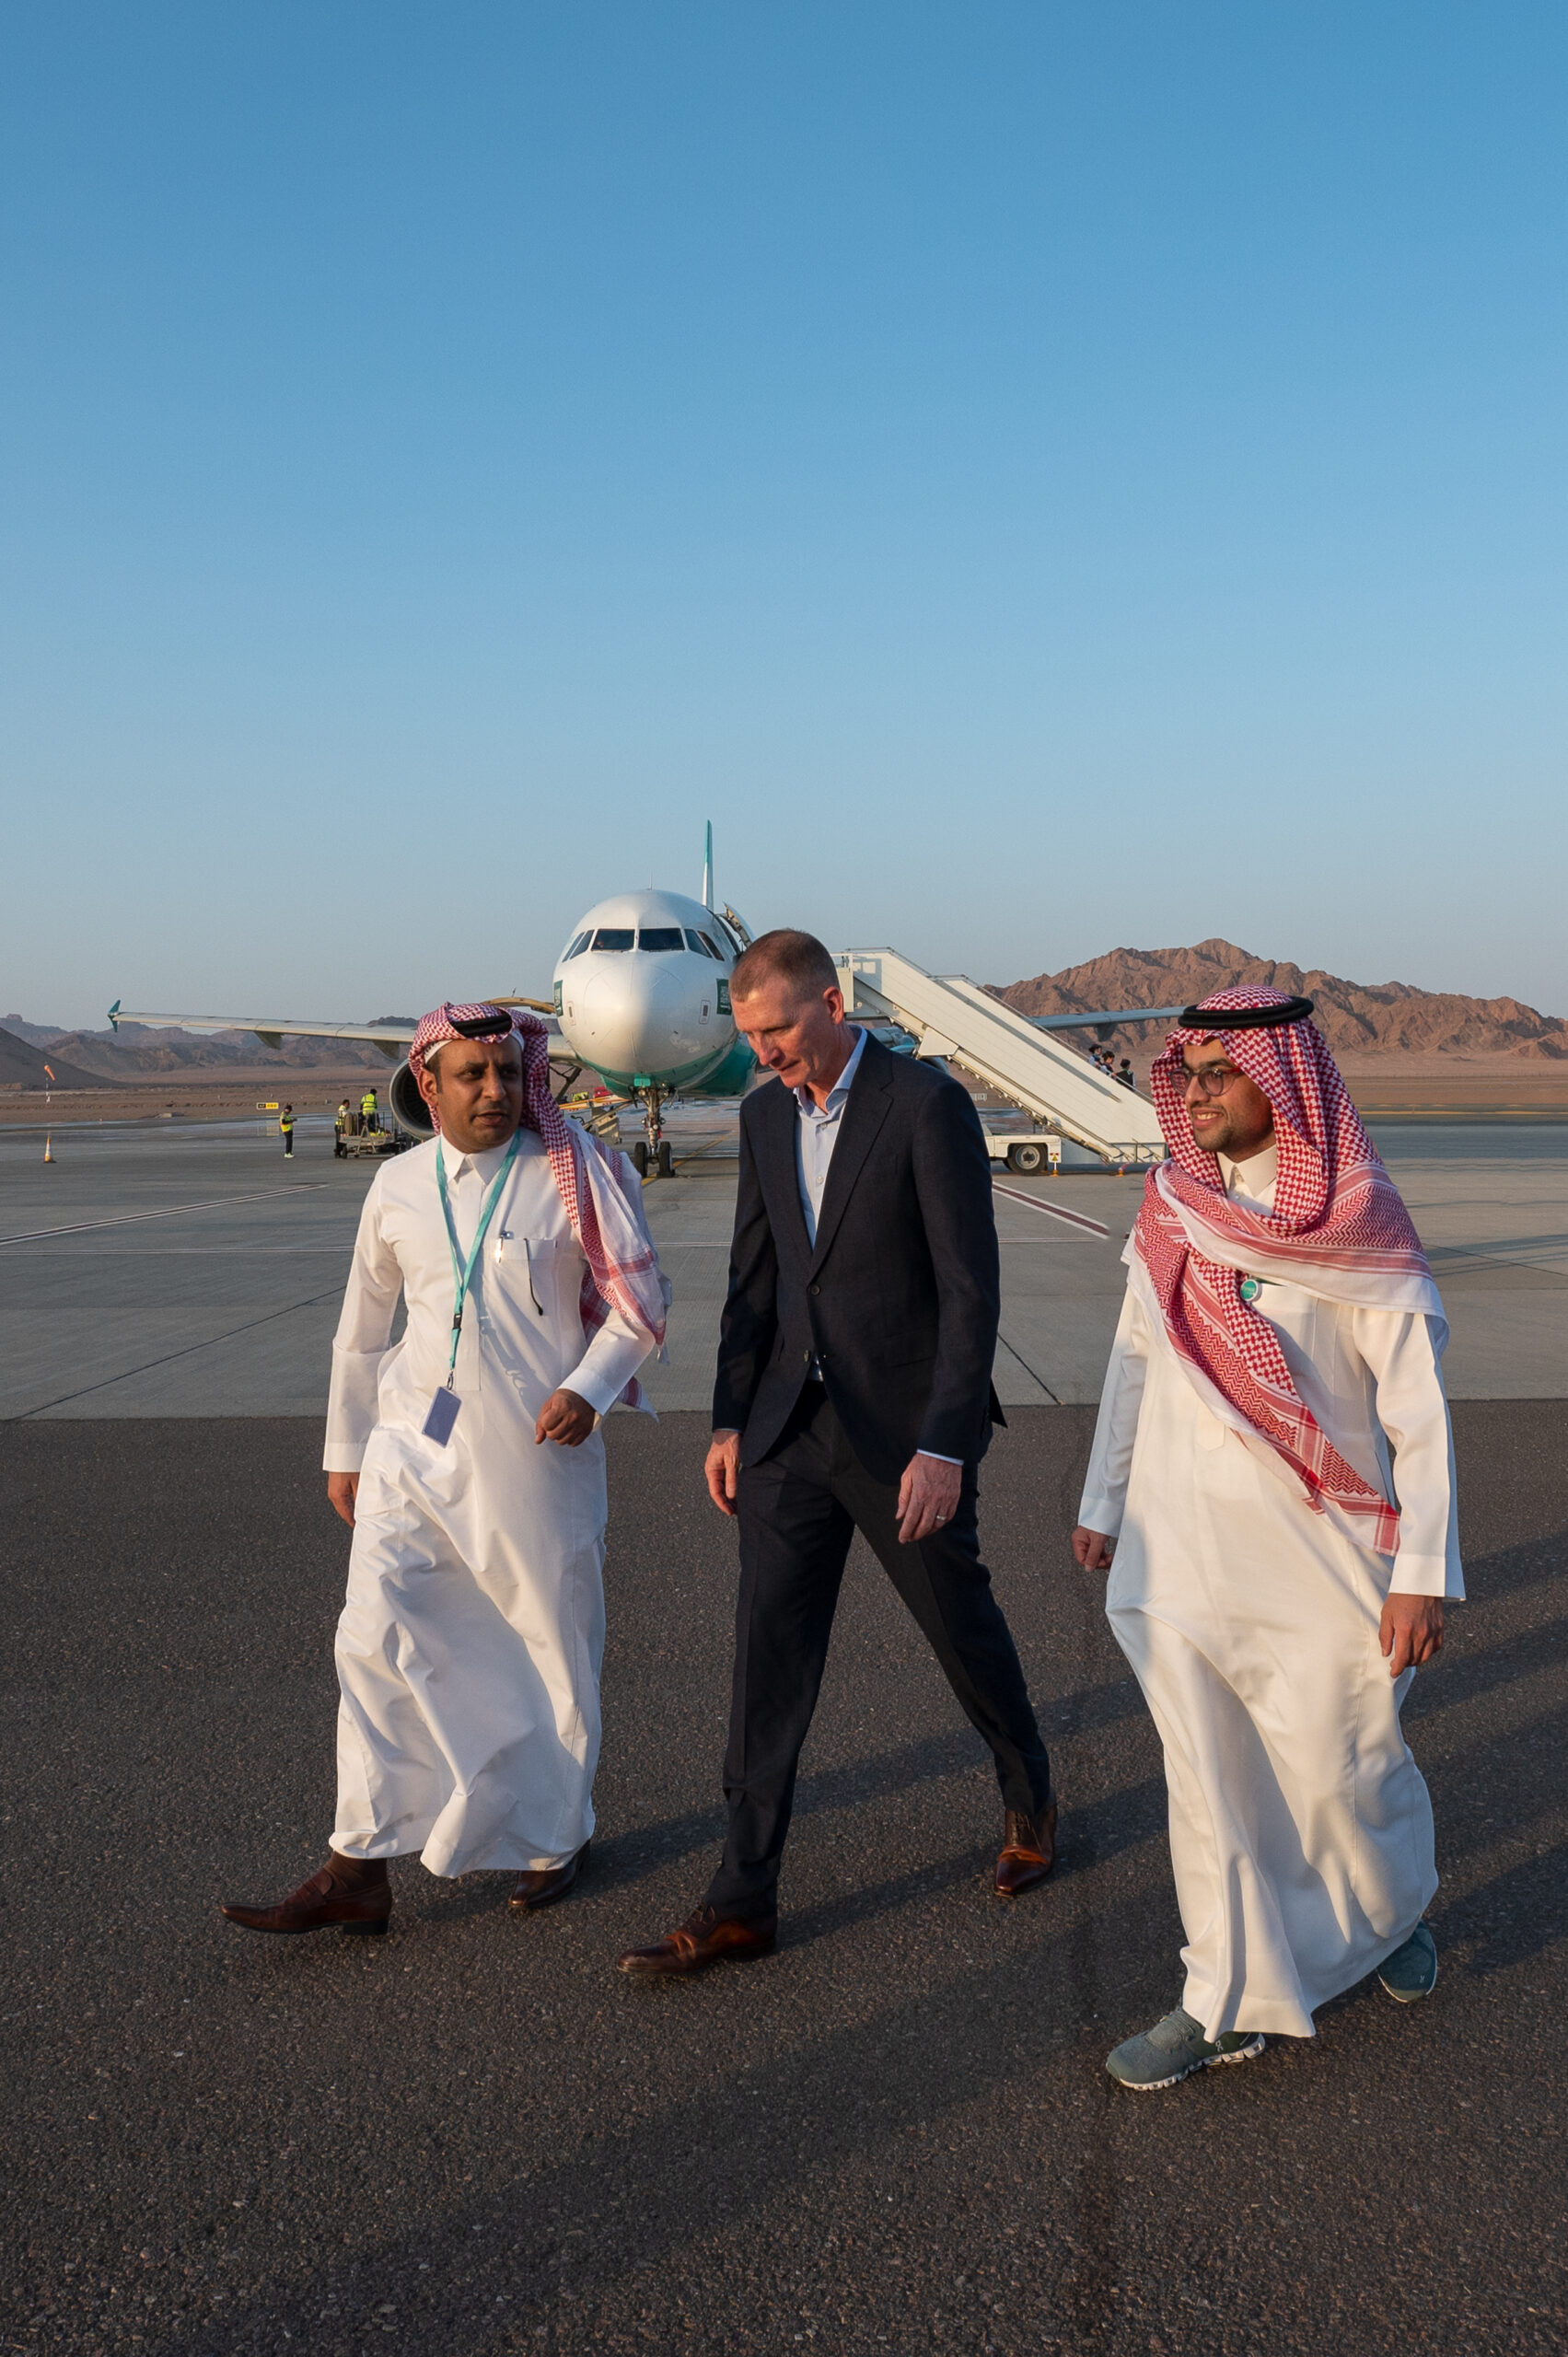 ALULA INTERNATIONAL AIRPORT RECEIVED THE FIRST FLYNAS DIRECT FLIGHT FROM CAIRO